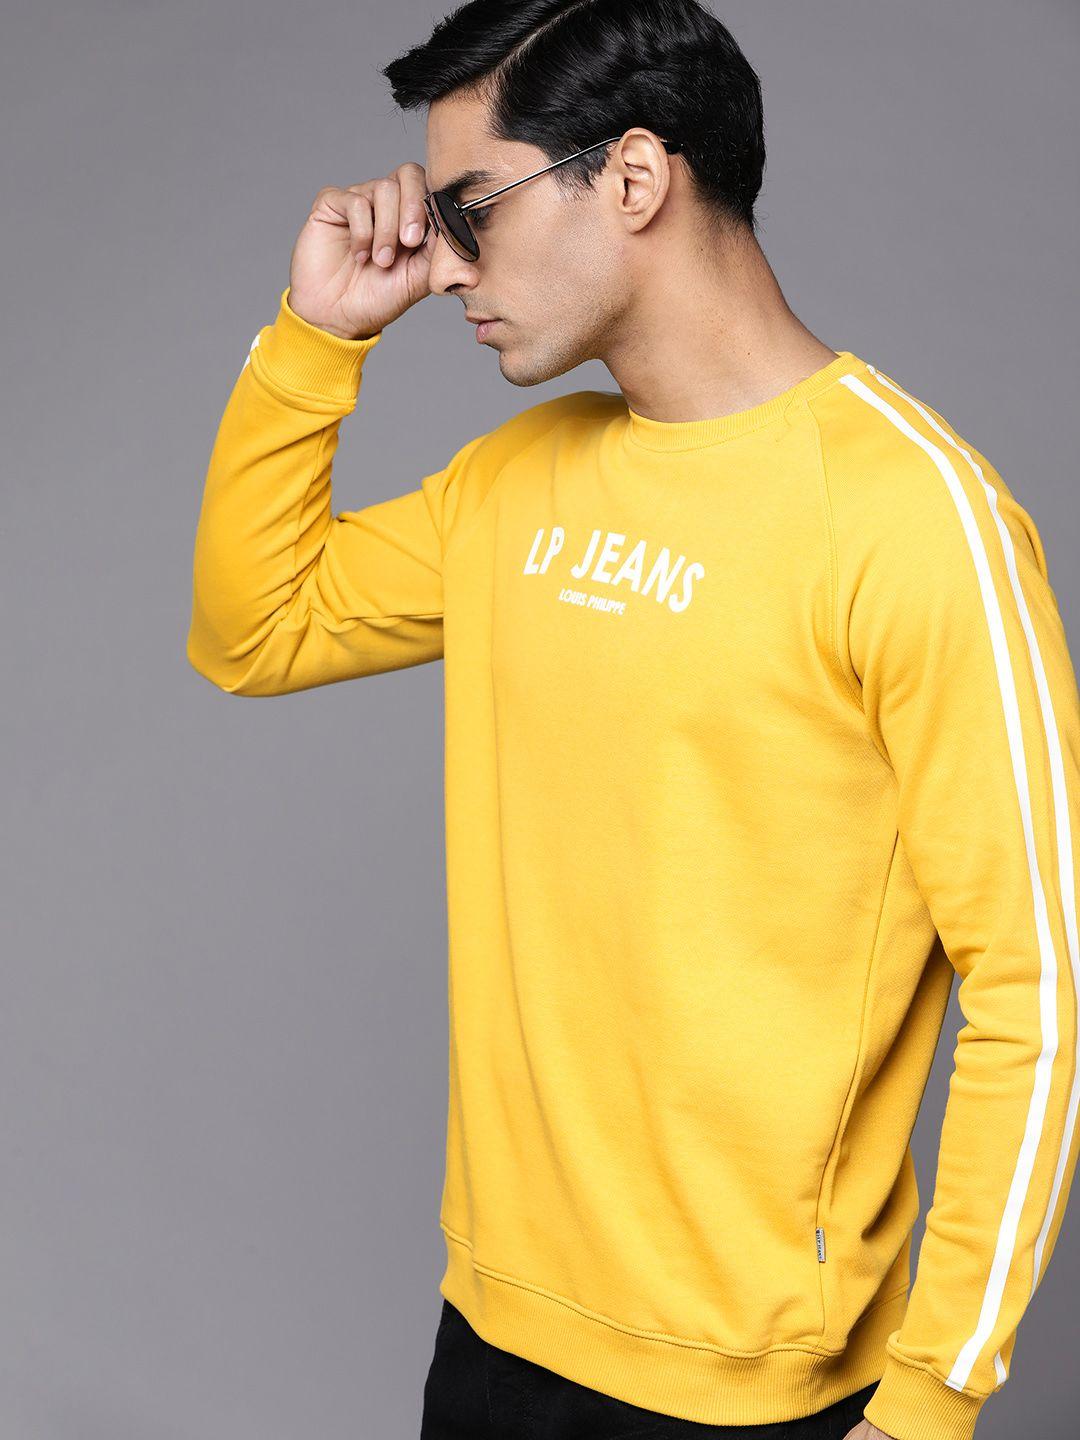 louis-philippe-jeans-men-yellow-knitted-printed-sweatshirt